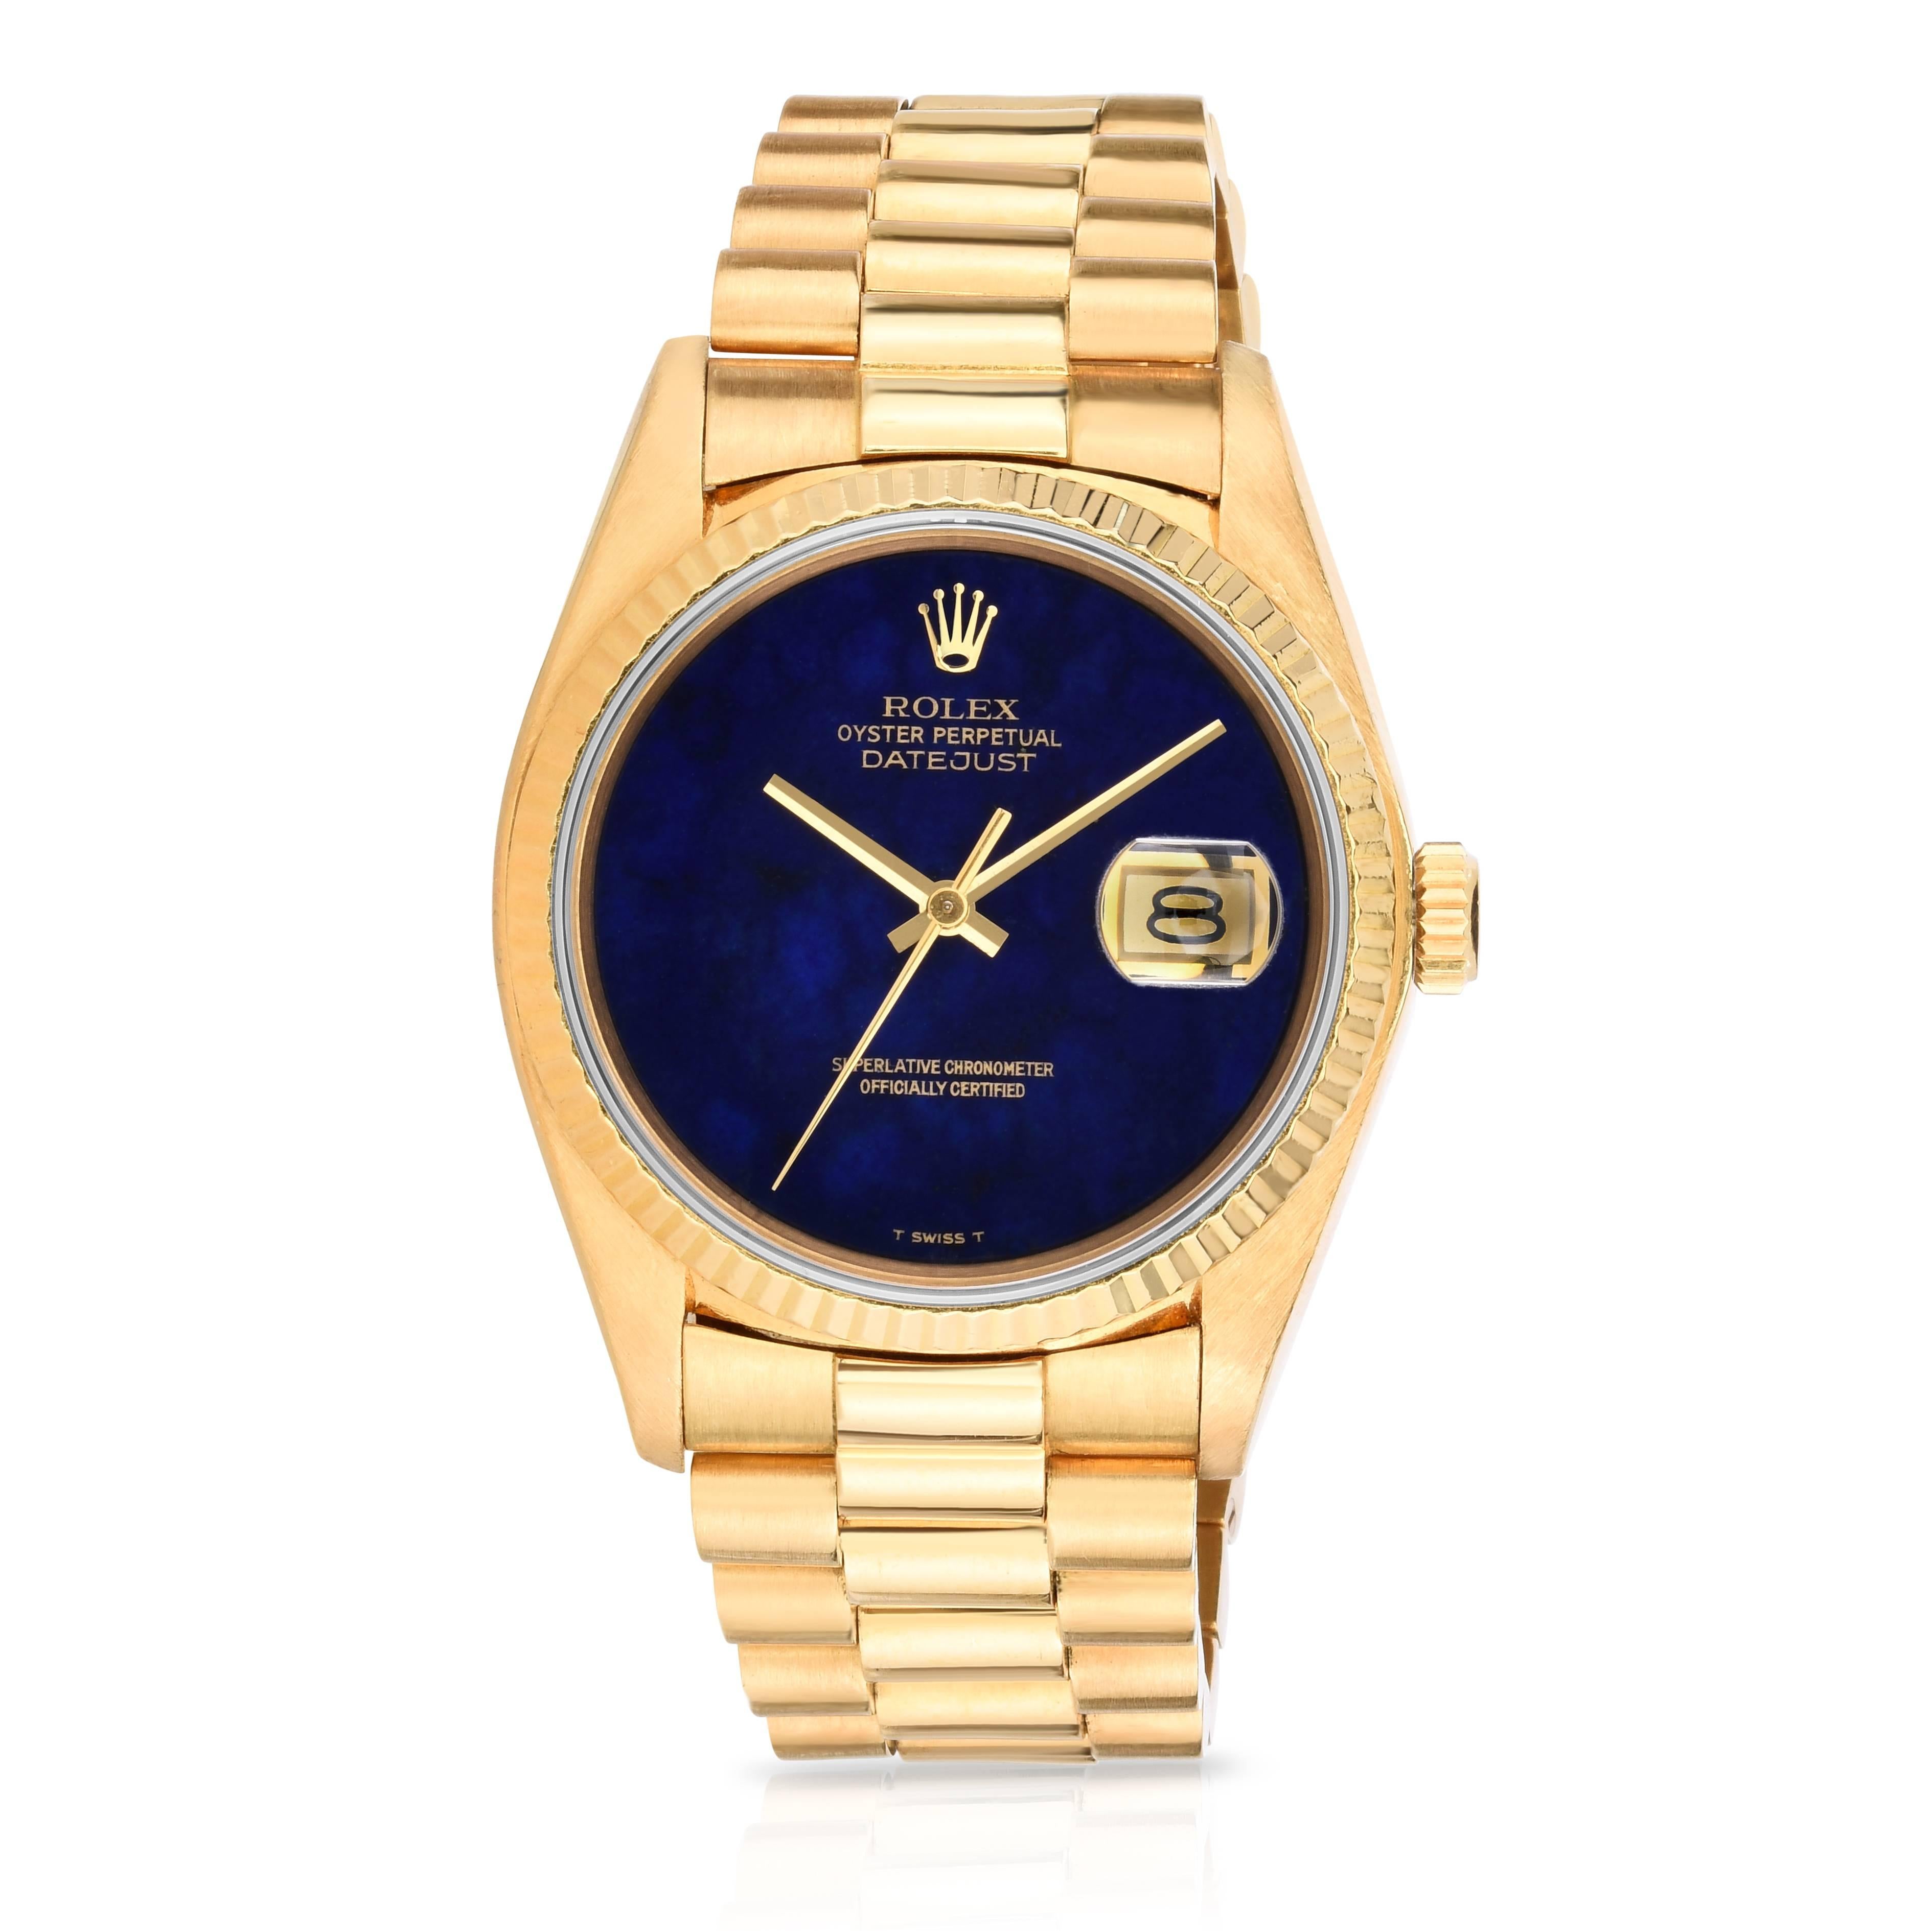 Vintage Rolex 18K Yellow Gold Oyster Perpetual Datejust
Rare Factory Lapis Lazuli Stone Dial with is Pristine and Mint
18K Yellow  Gold Fluted Bezel  
36mm in size 
Sapphire Crystal
Quick-Set Date Function  
1981 Production  
Comes Fitted on